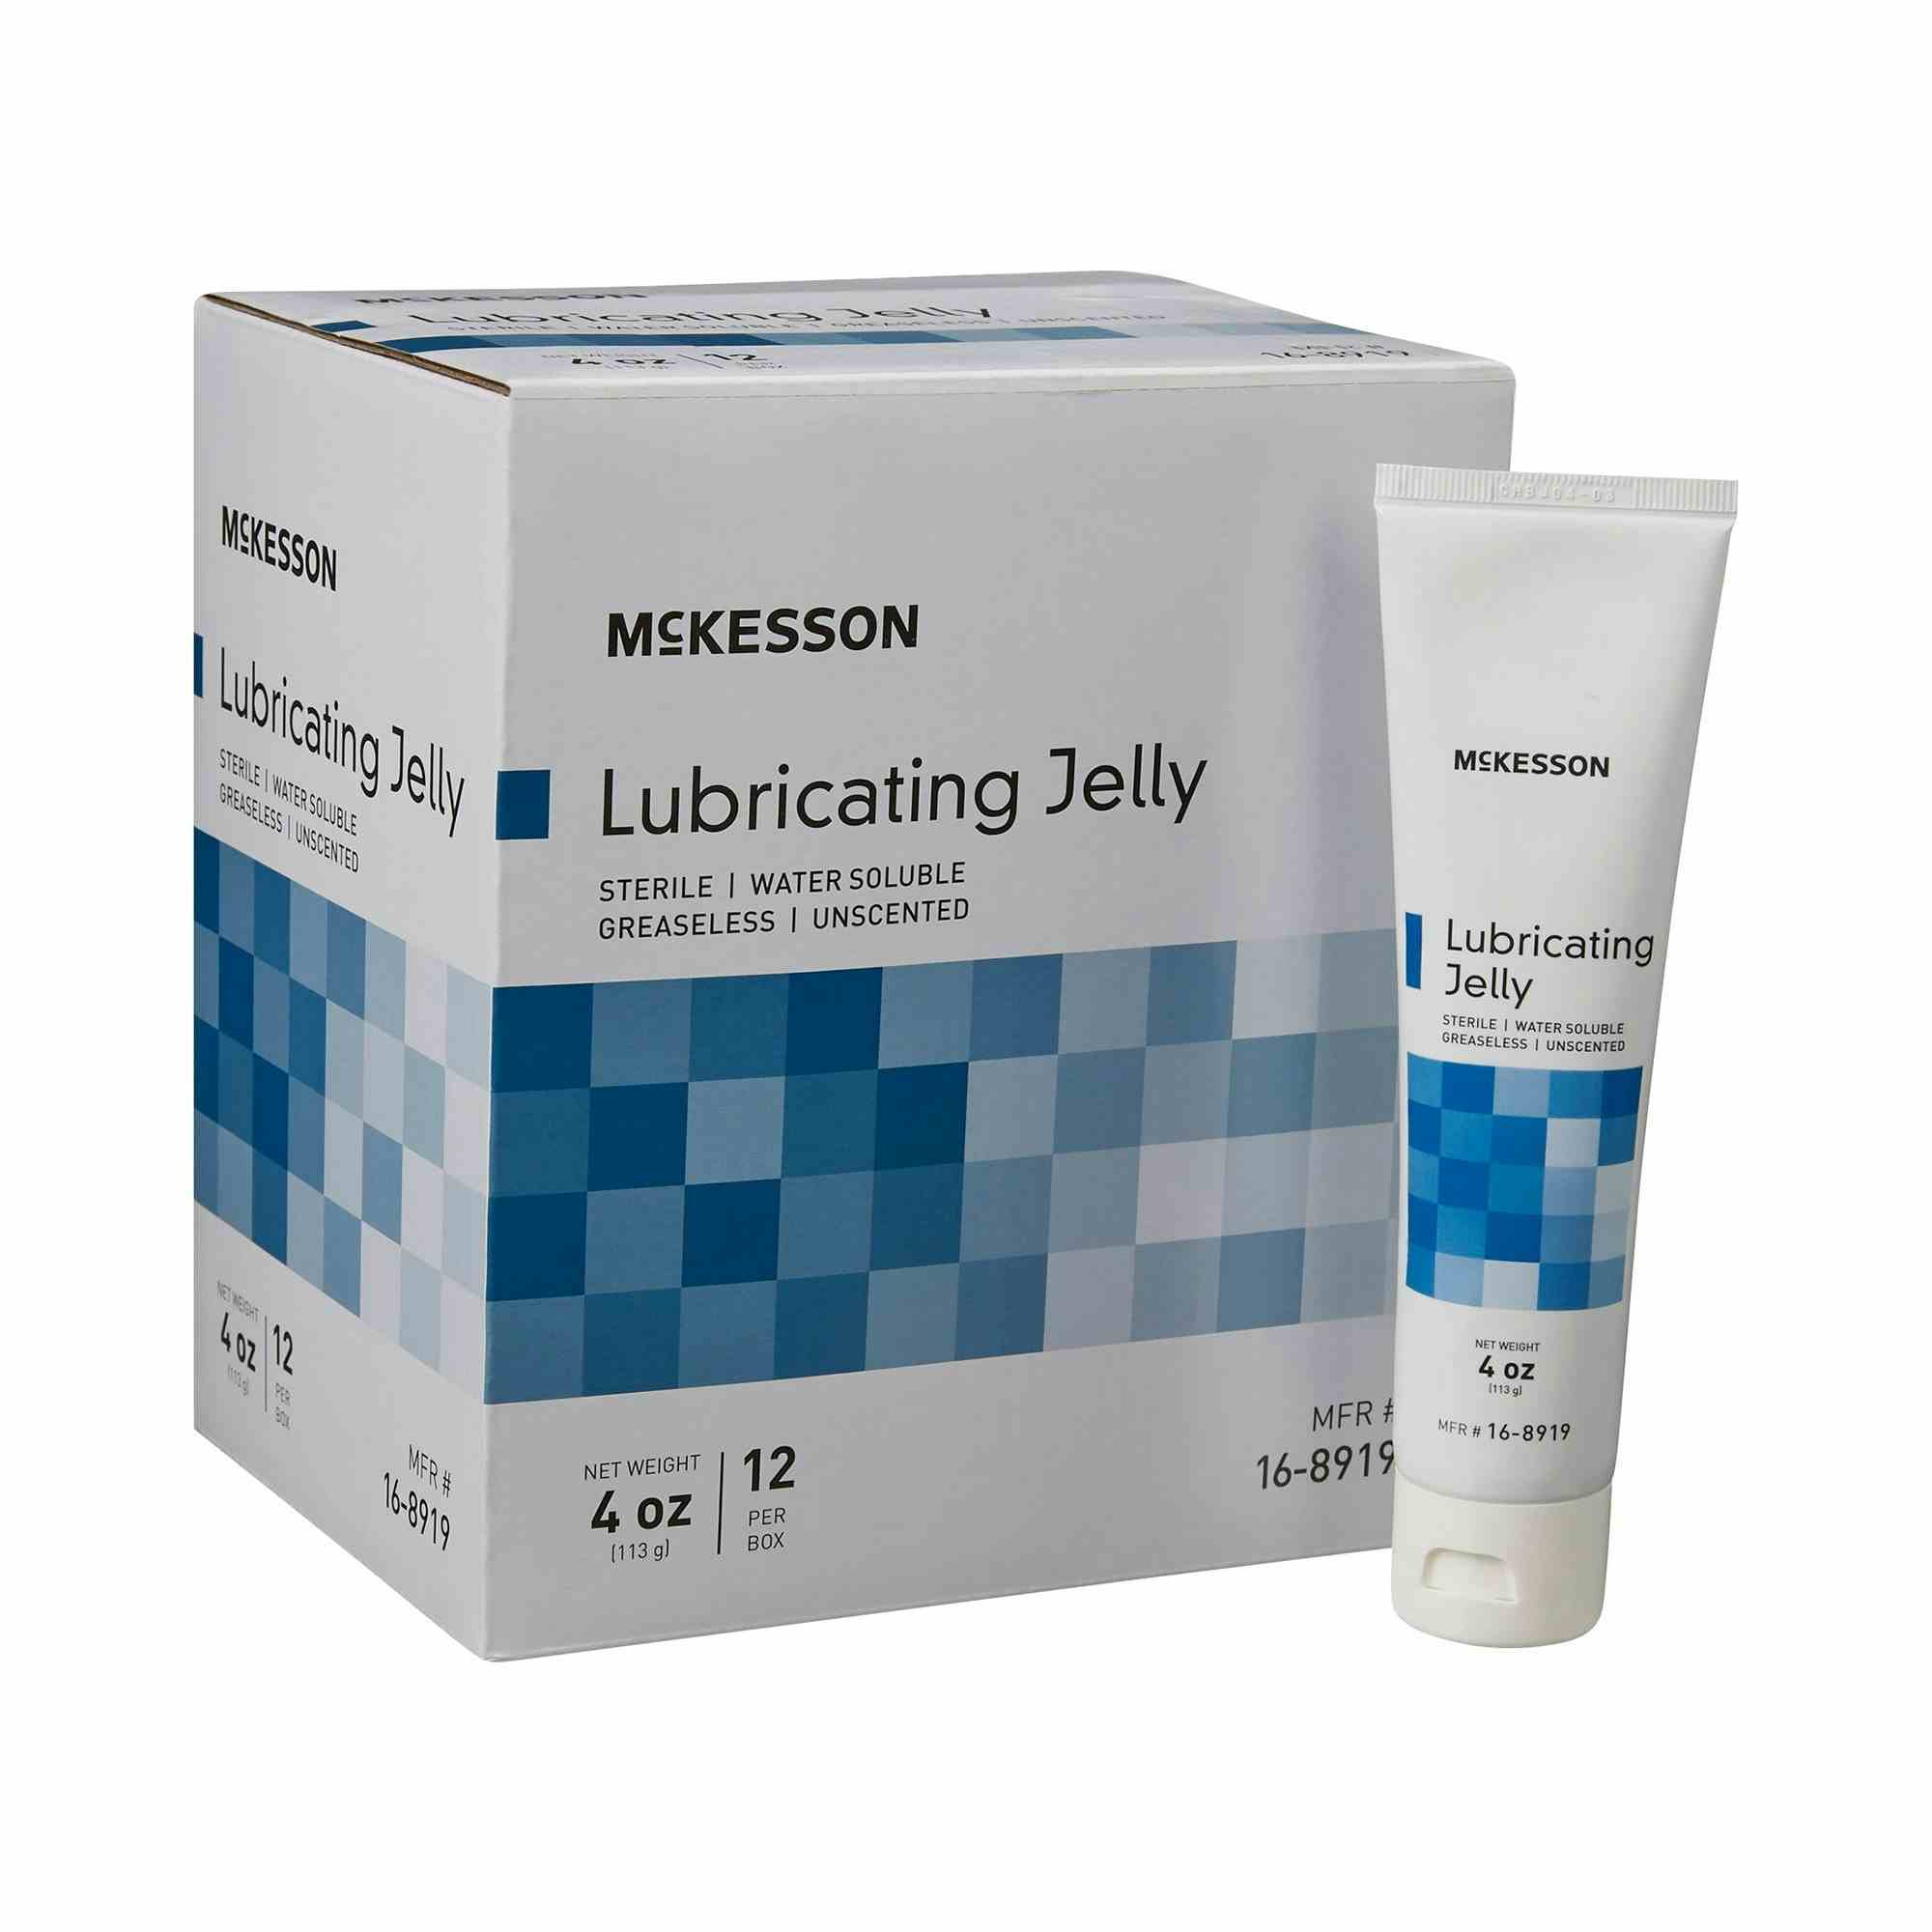 McKesson Lubricating Jelly, Unscented, 16-8919, 4 oz. Tube - Box of 12